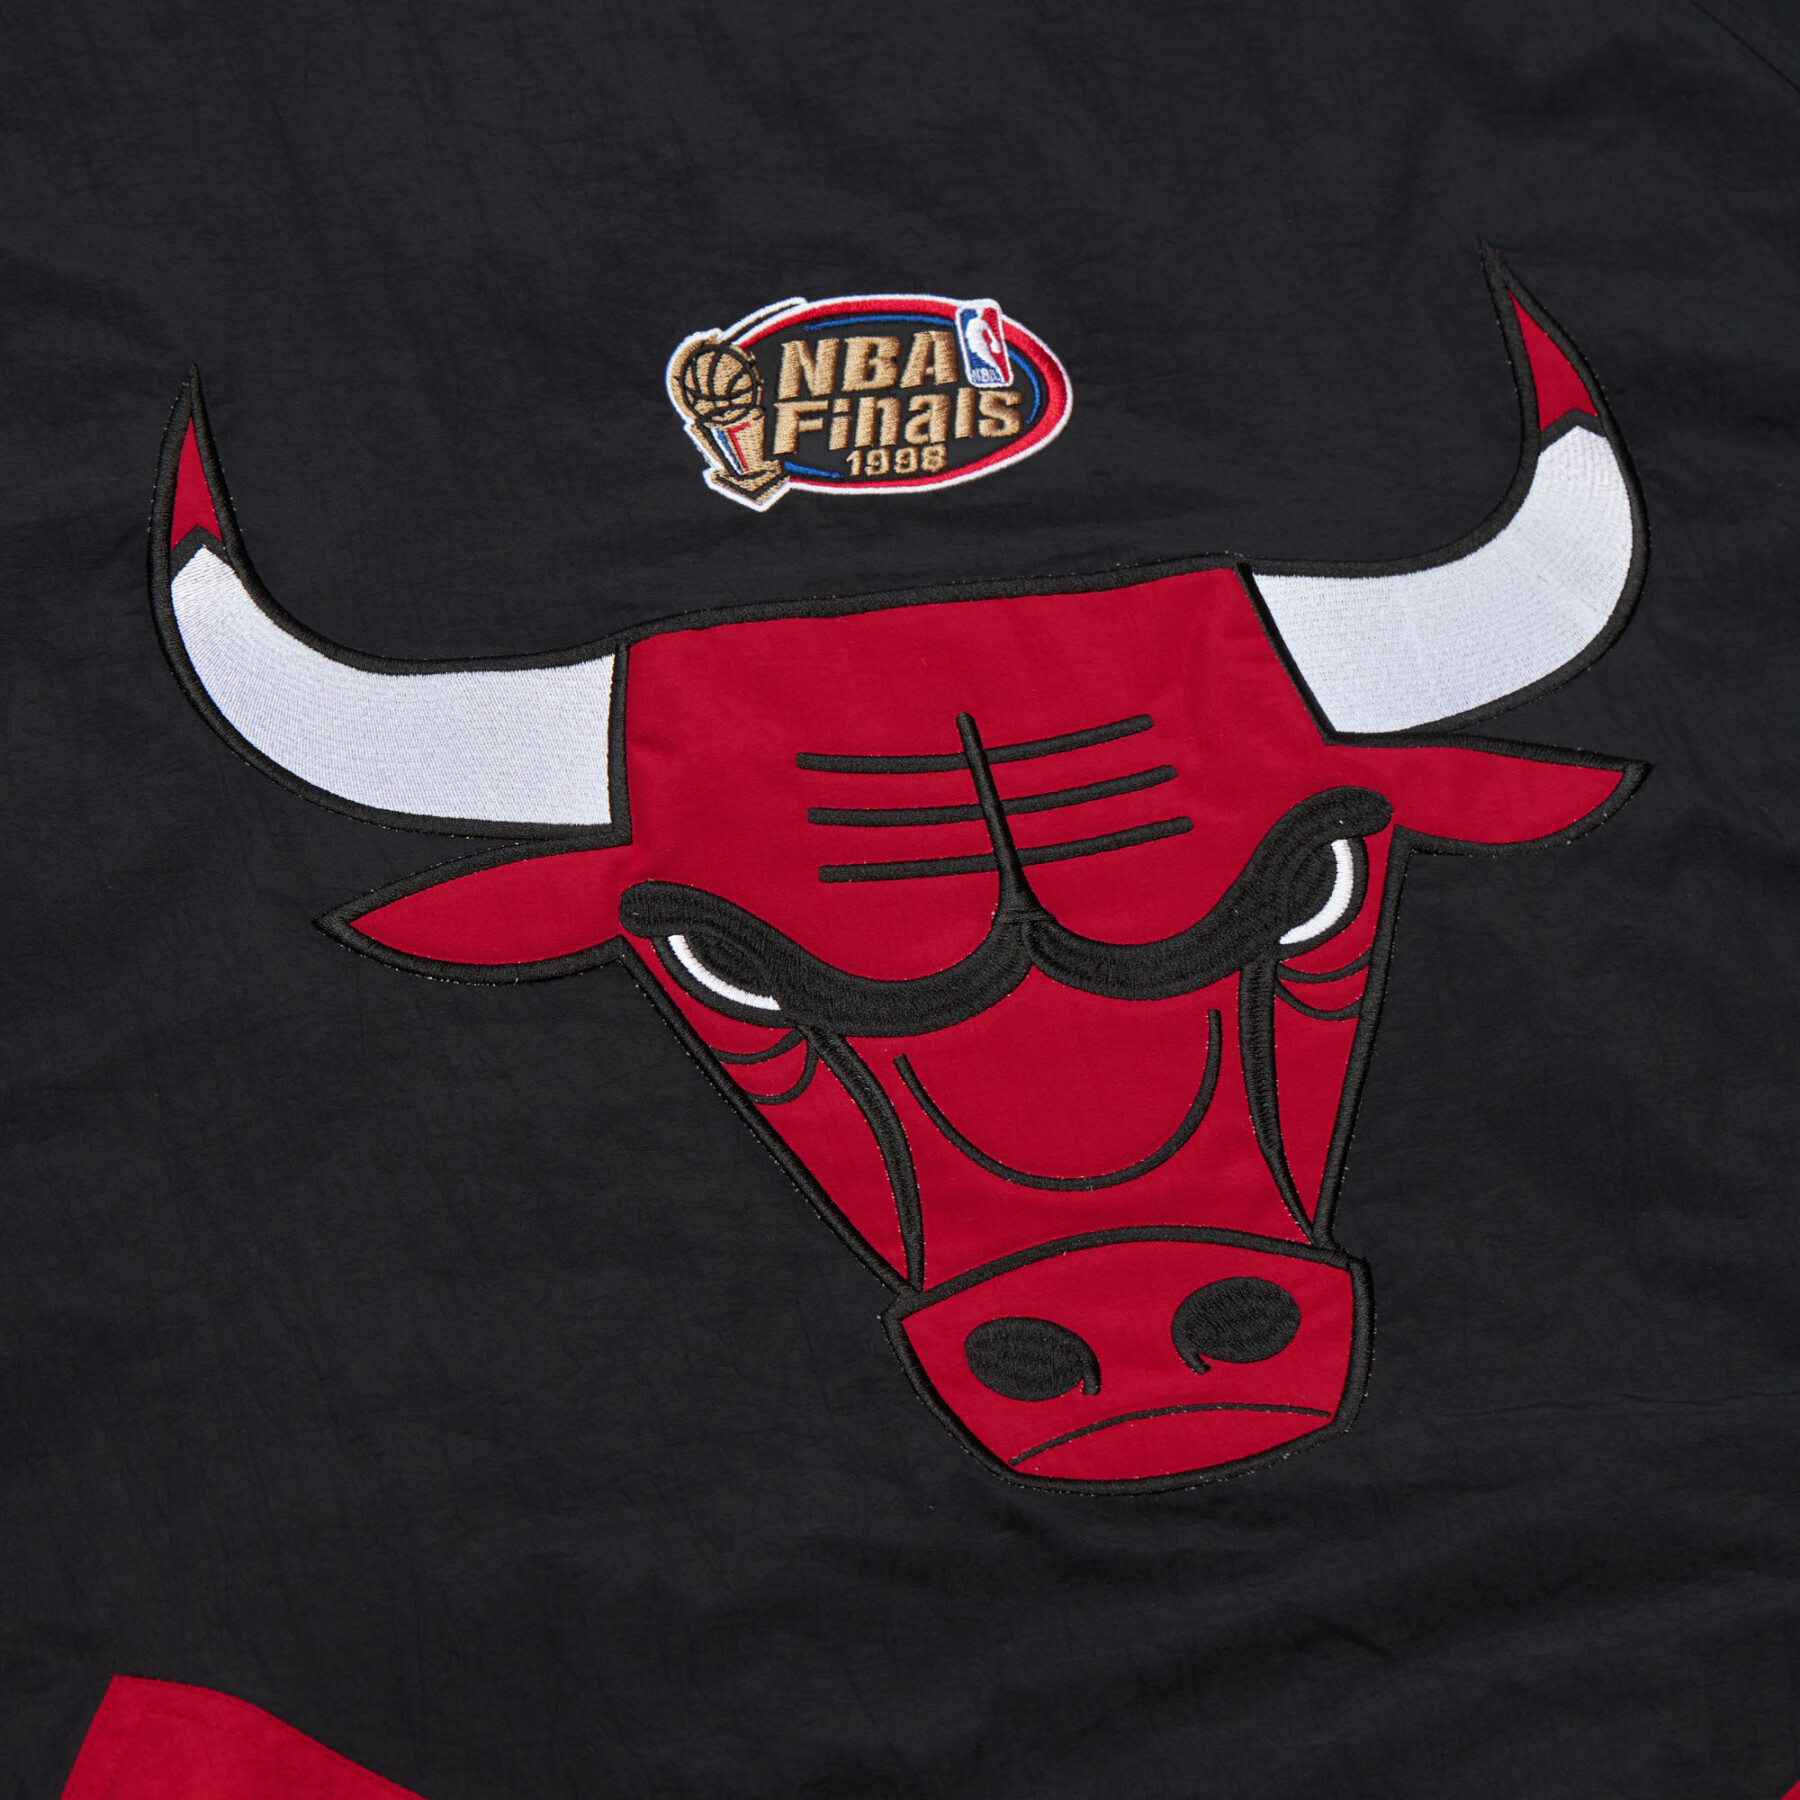 Giacca impermabile con zip Chicago Bulls